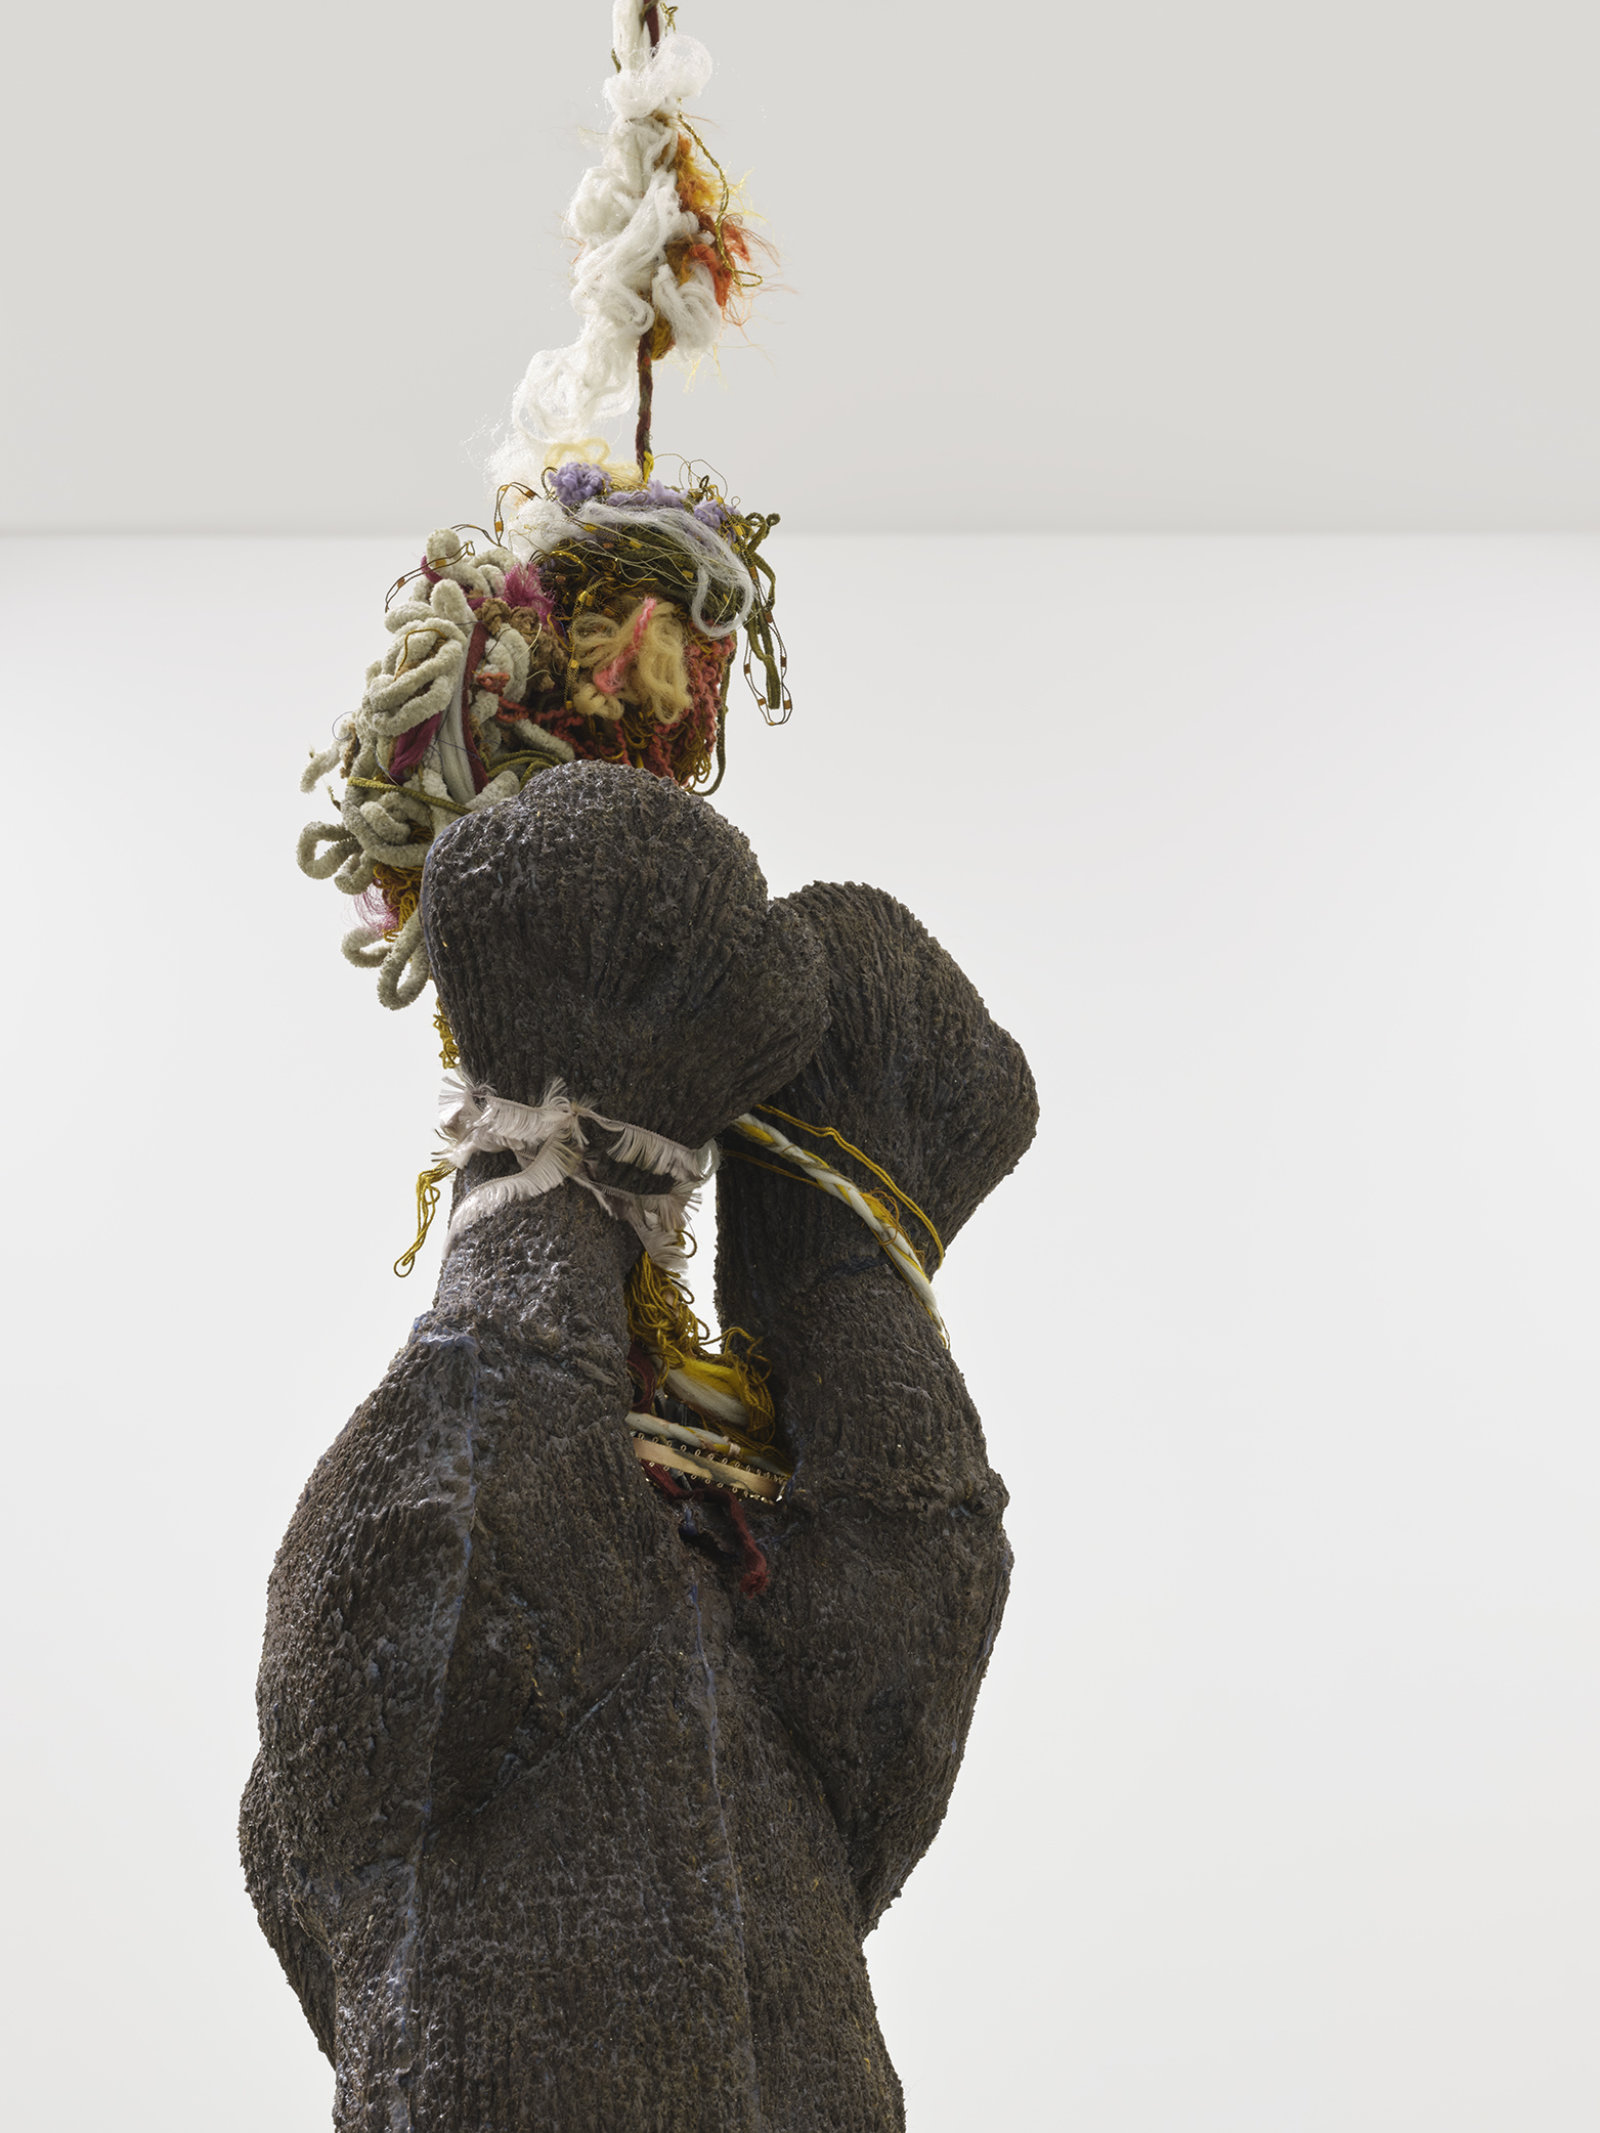 Liz Magor, Delivery (brown), 2018, silicone rubber, textiles, twine, 191 x 42 x 42 in. (485 x 107 x 107 cm)